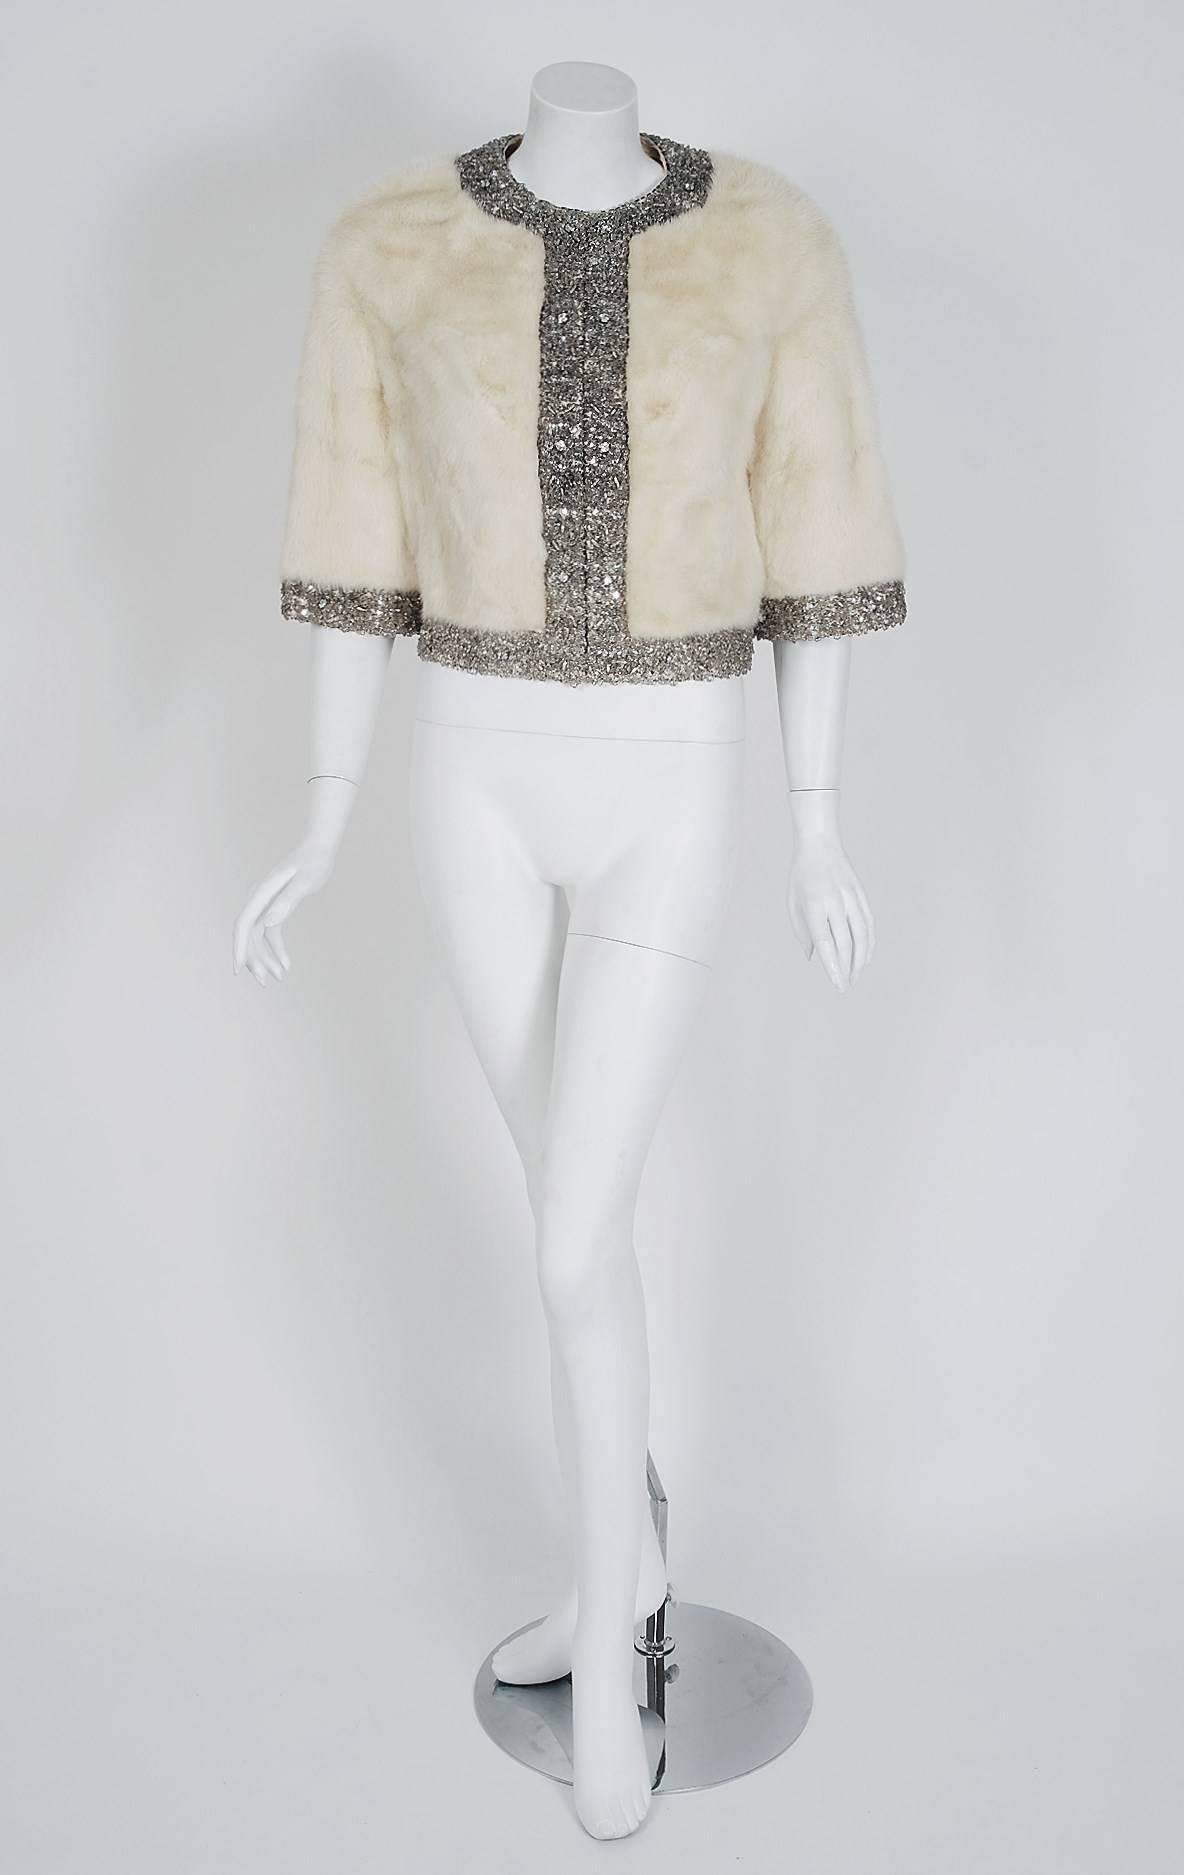 An extraordinary, ivory-white colored genuine Scandinavian mink fur from the high-end boutique 